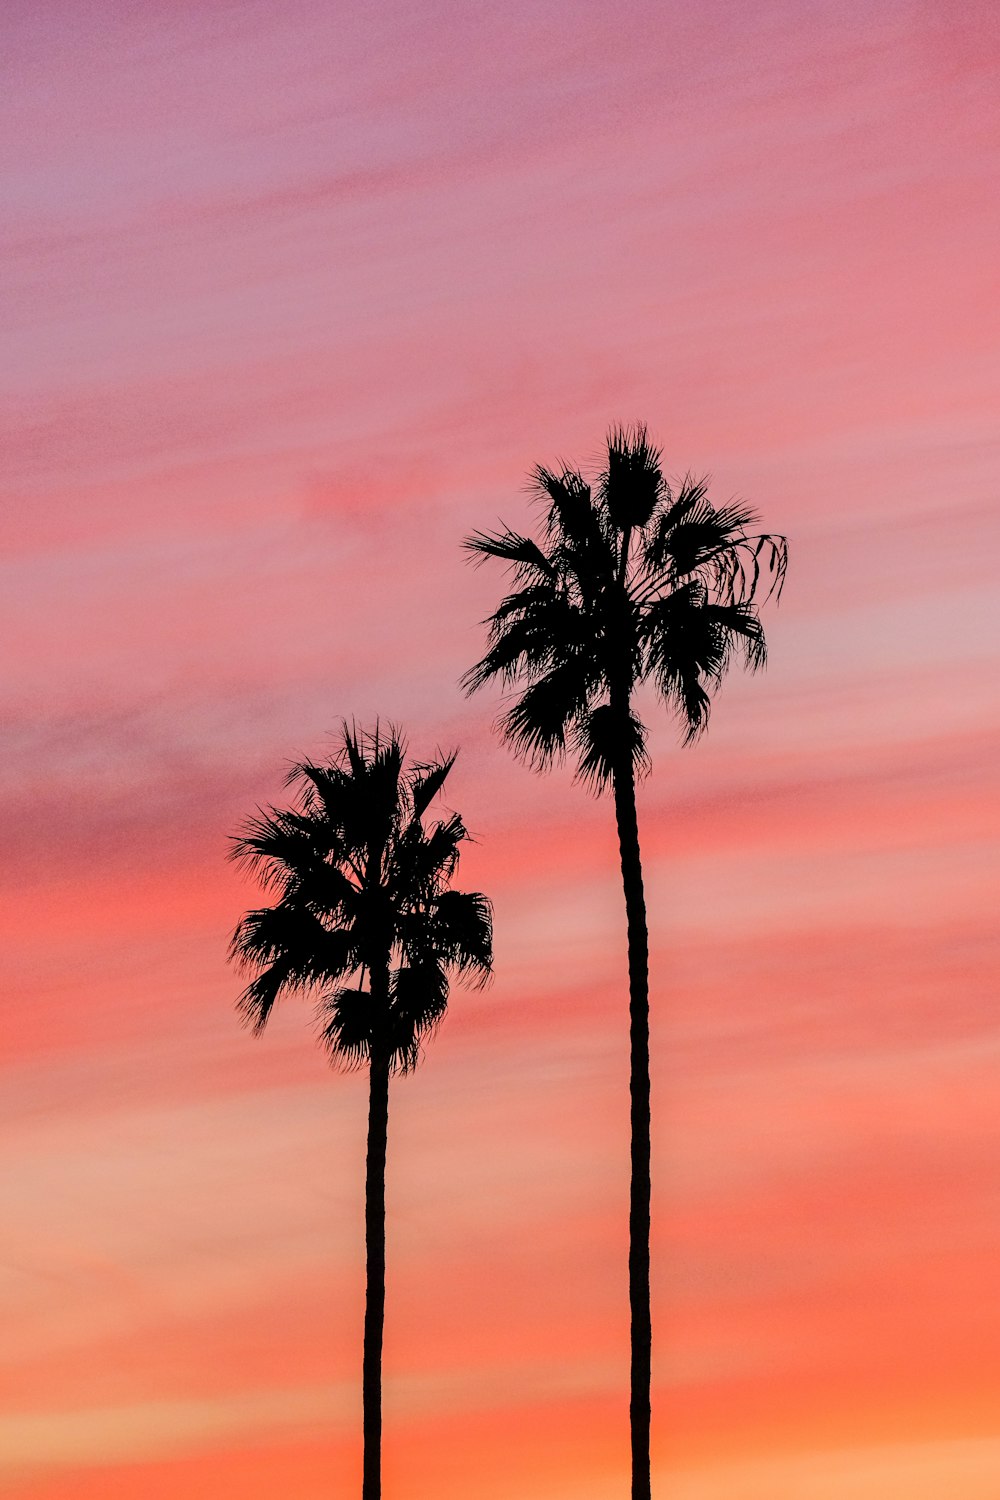 two palm trees are silhouetted against a colorful sky